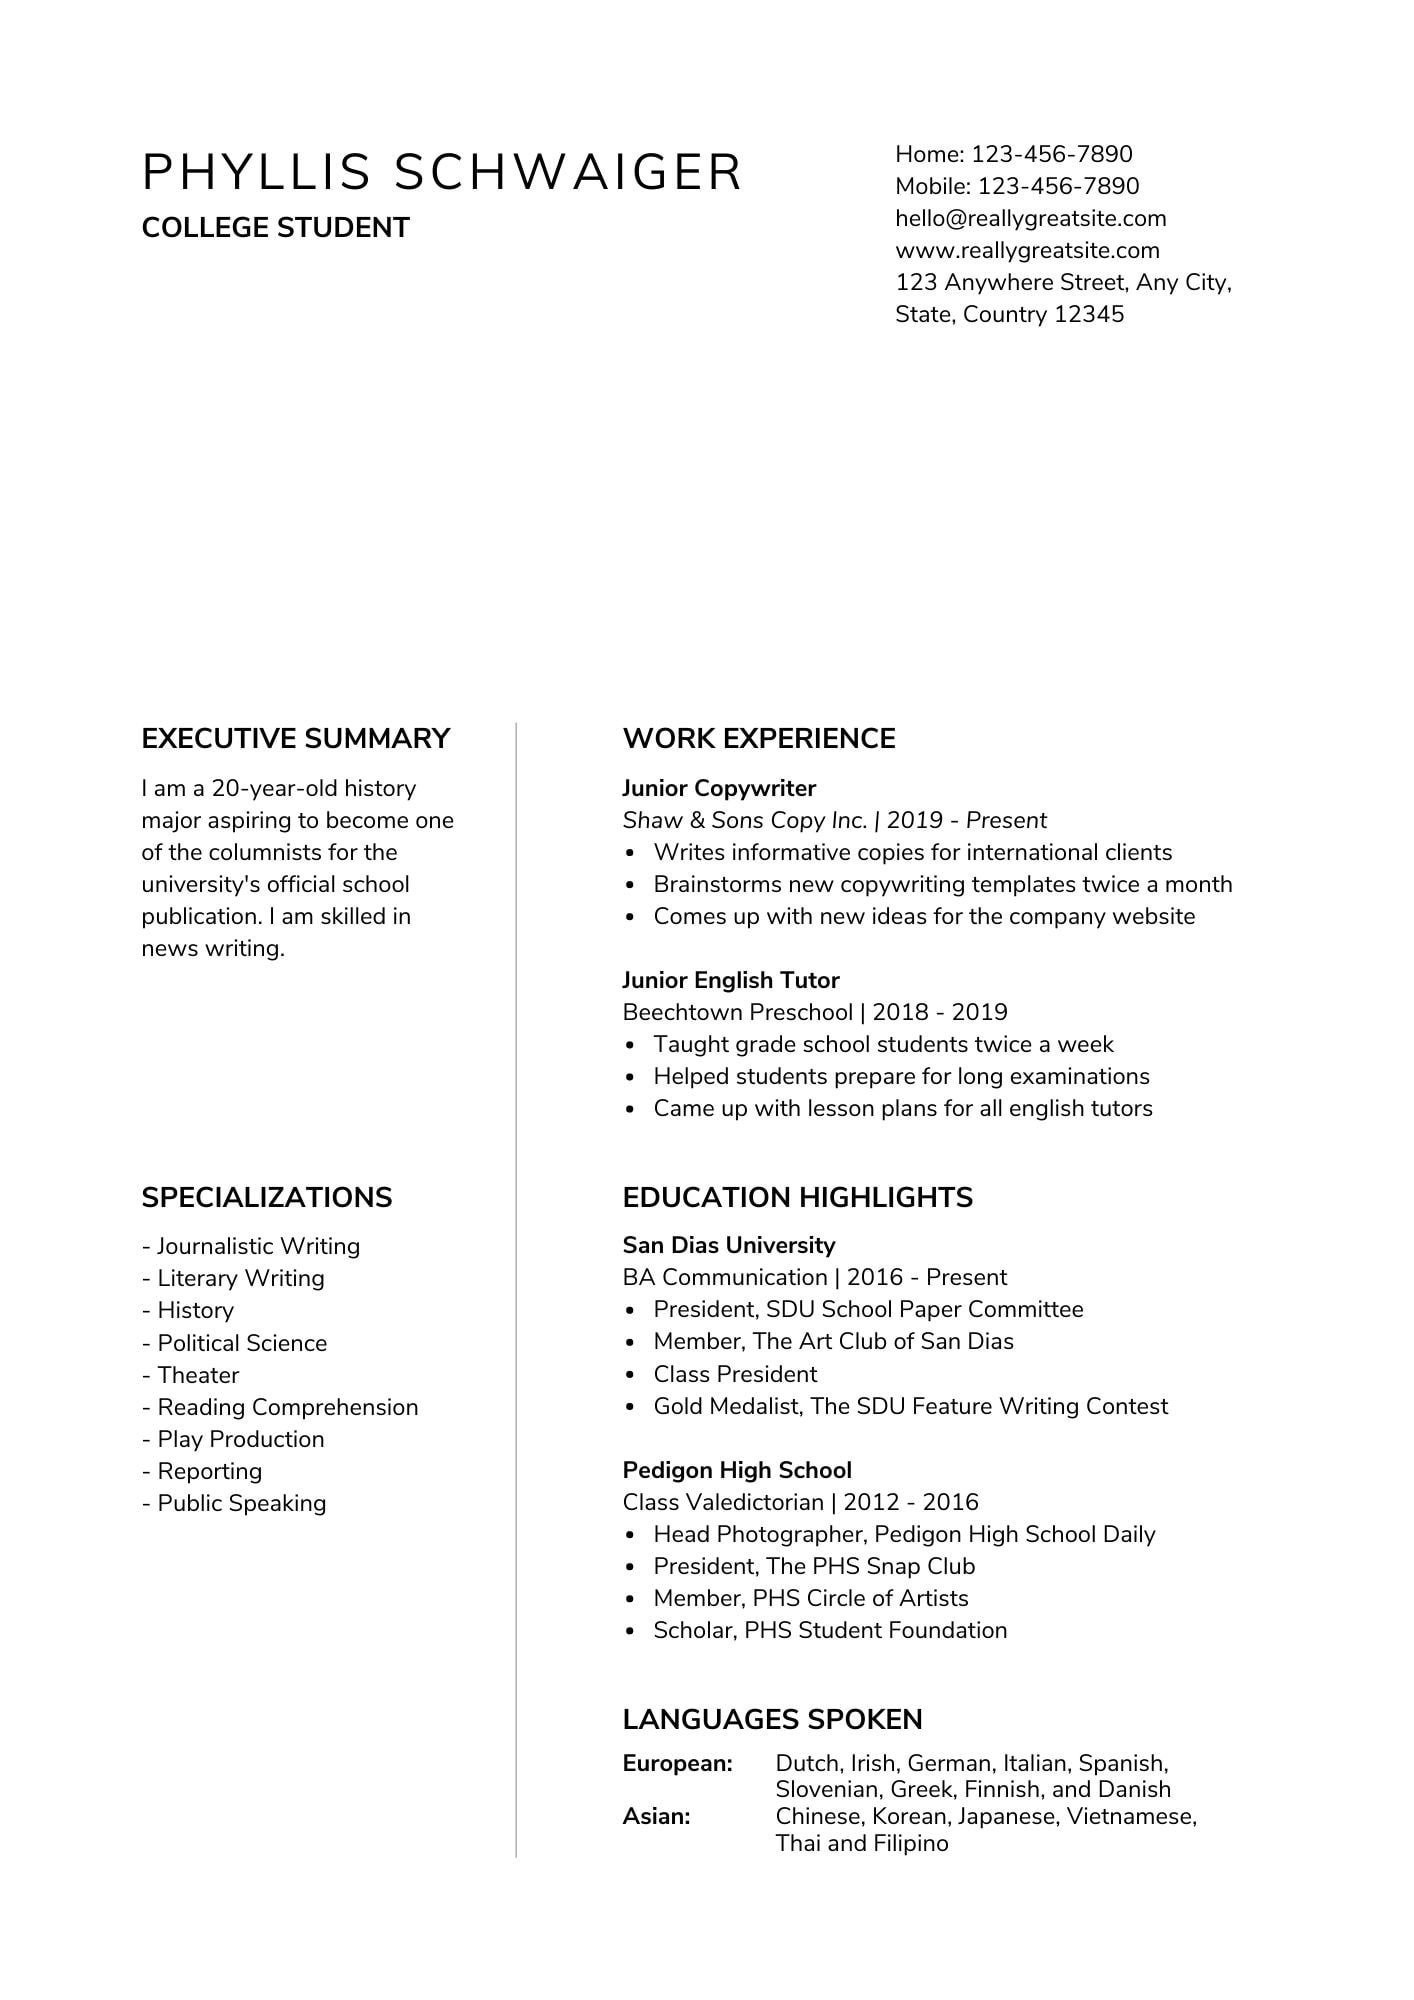 First Job Work Experience Resume Sample How to Make A Resume for First Job Canva